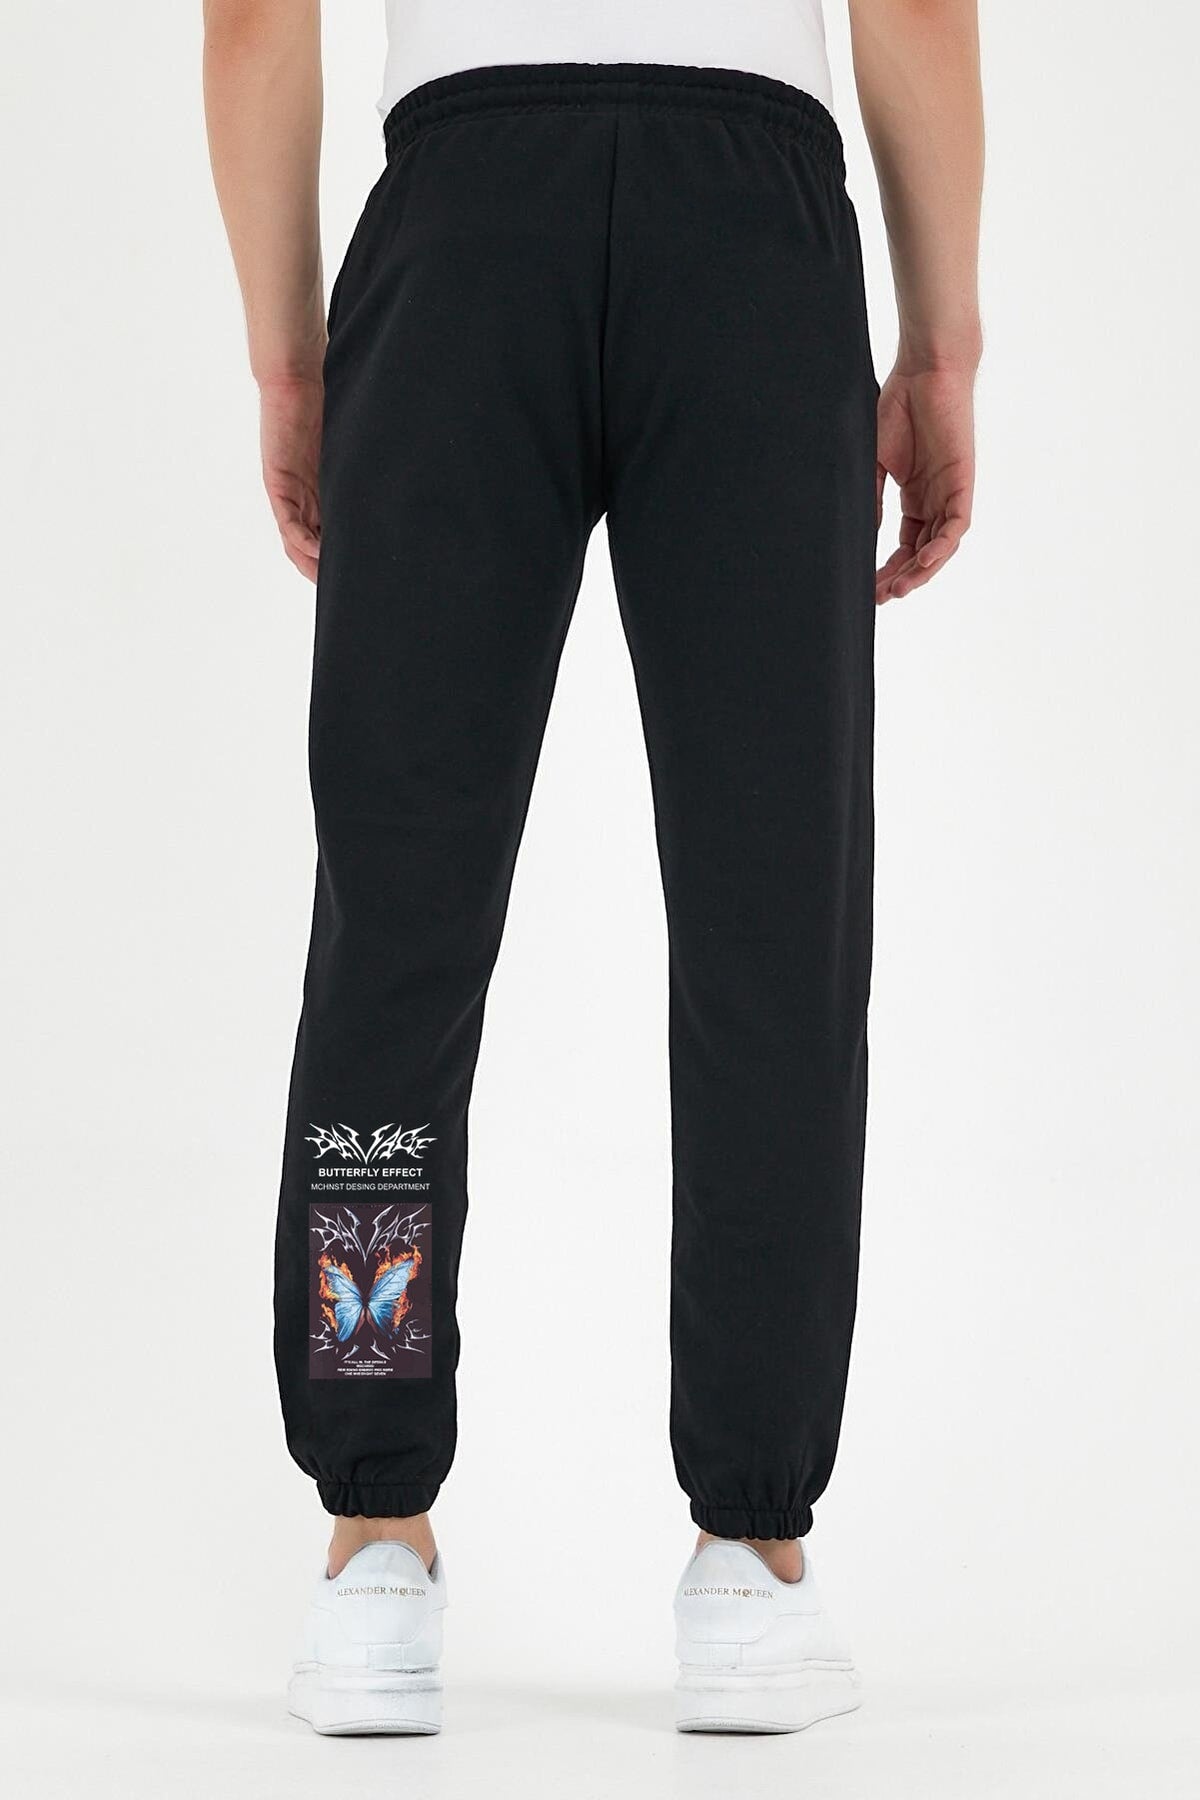 Black Unisex Butterfly Printed Jogger Sweatpants